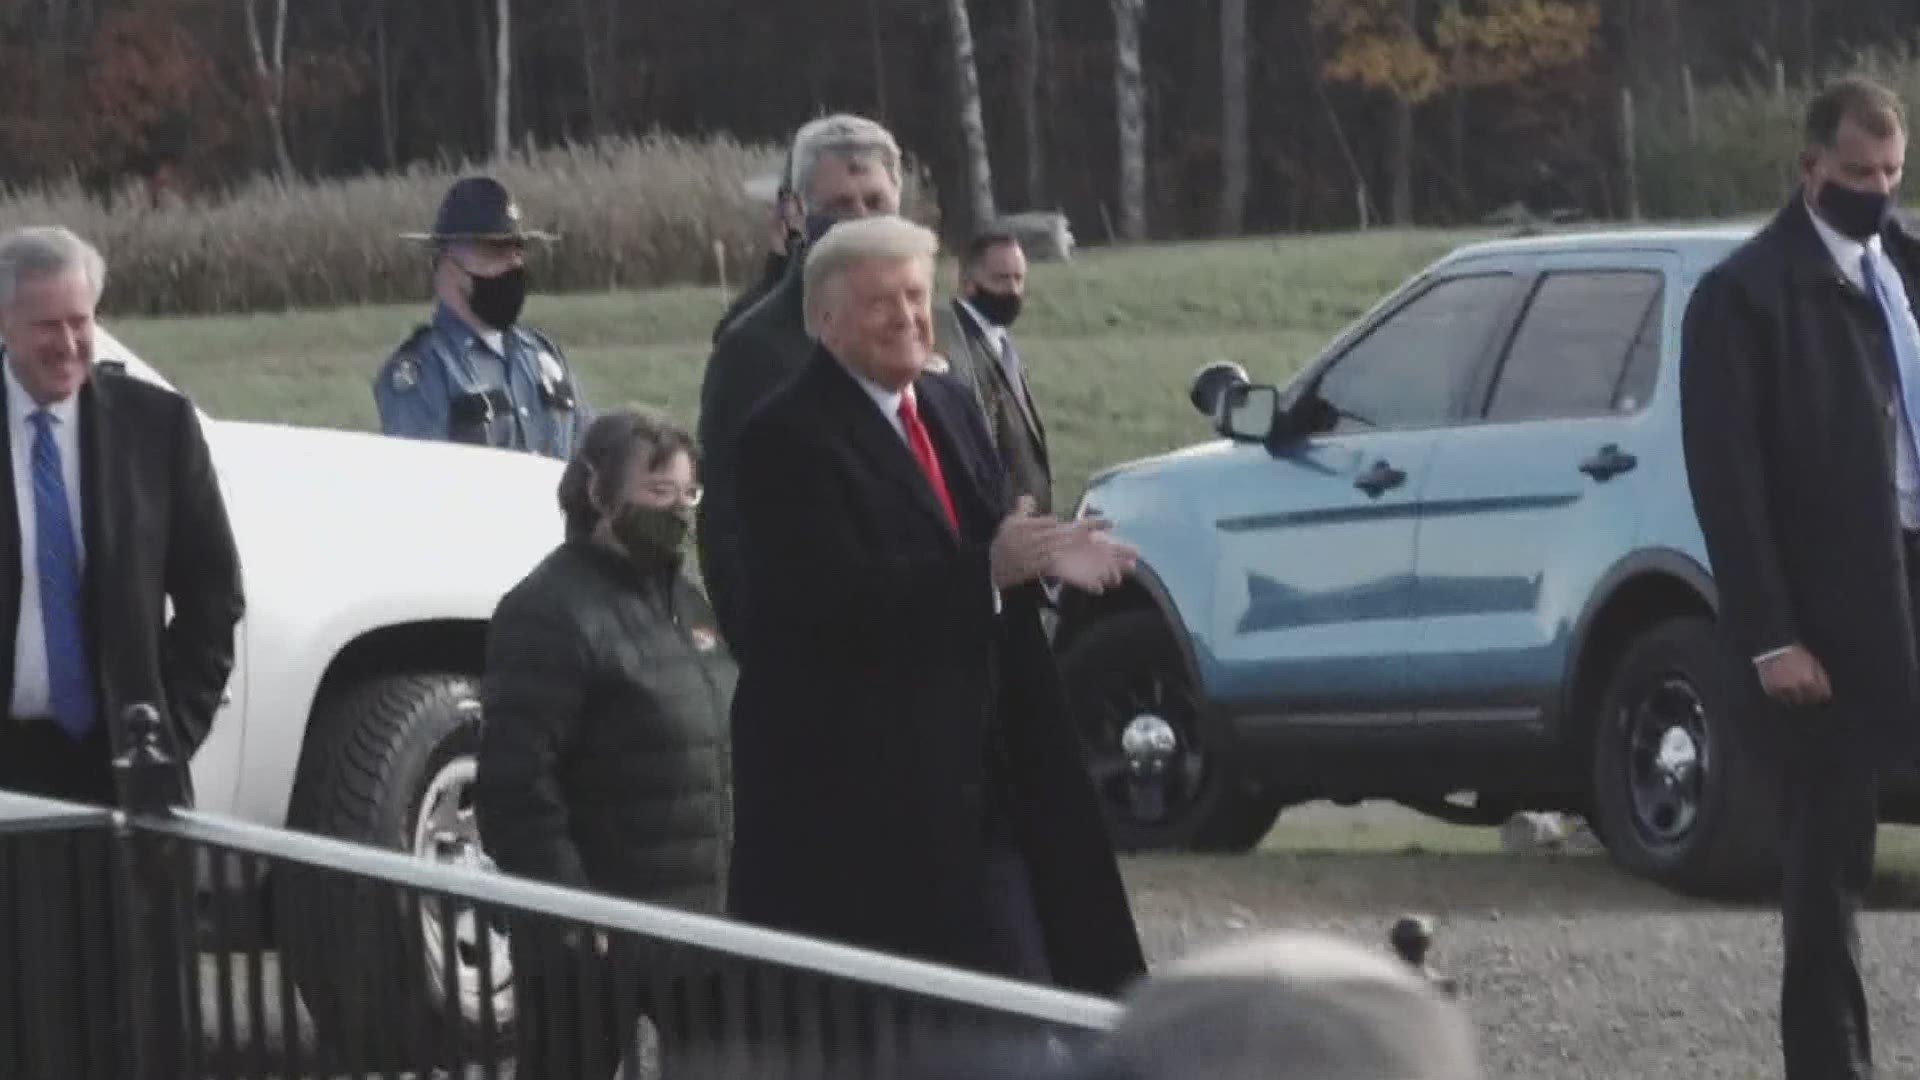 Around 3:15 Sunday, the President's motorcade made its way from Bangor International Airport to Treworgy Family Orchards in Levant.